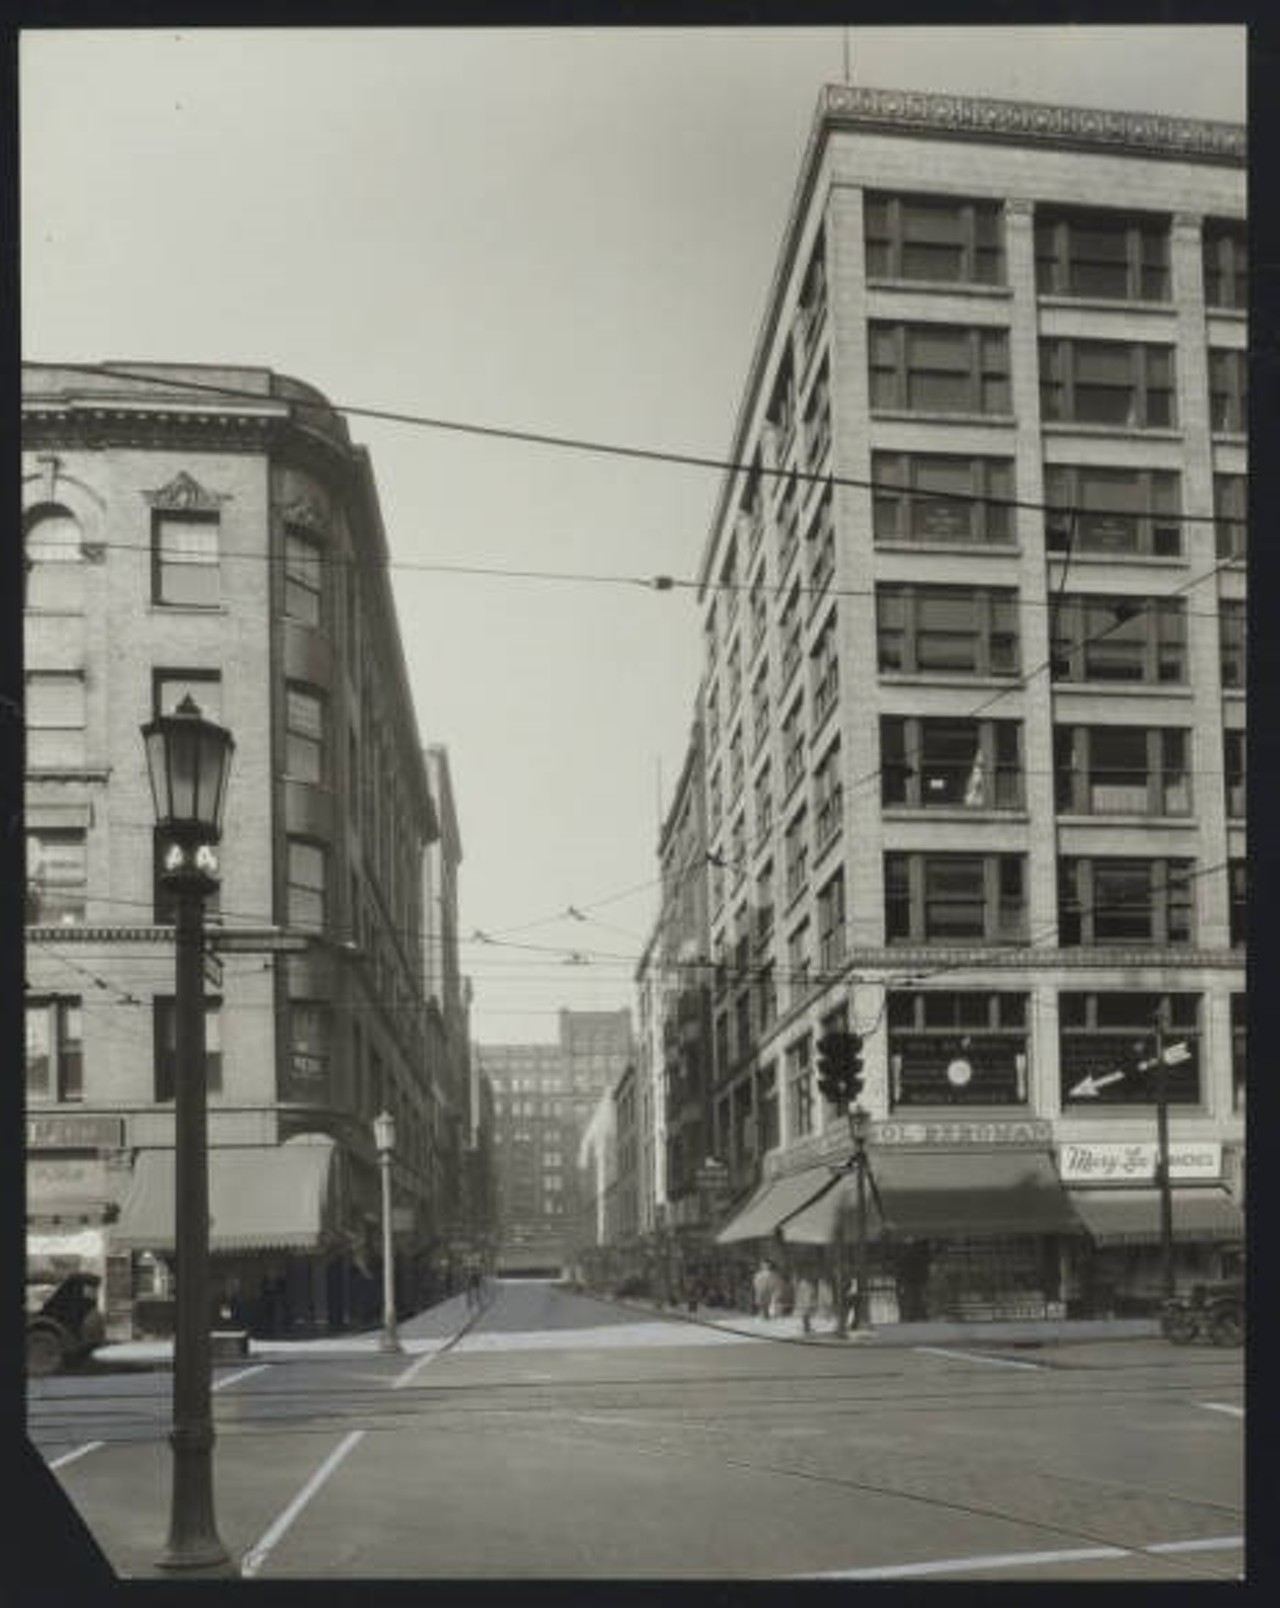 Looking north on  East 4th Street from  Prospect to  Euclid Avenues, showing a view of the Arcade on the north side of Euclid Avenue. Sol Bergman Diamonds  and Mary Lee Candies are on the northeast corner of Prospect and East 4th. c. 1929